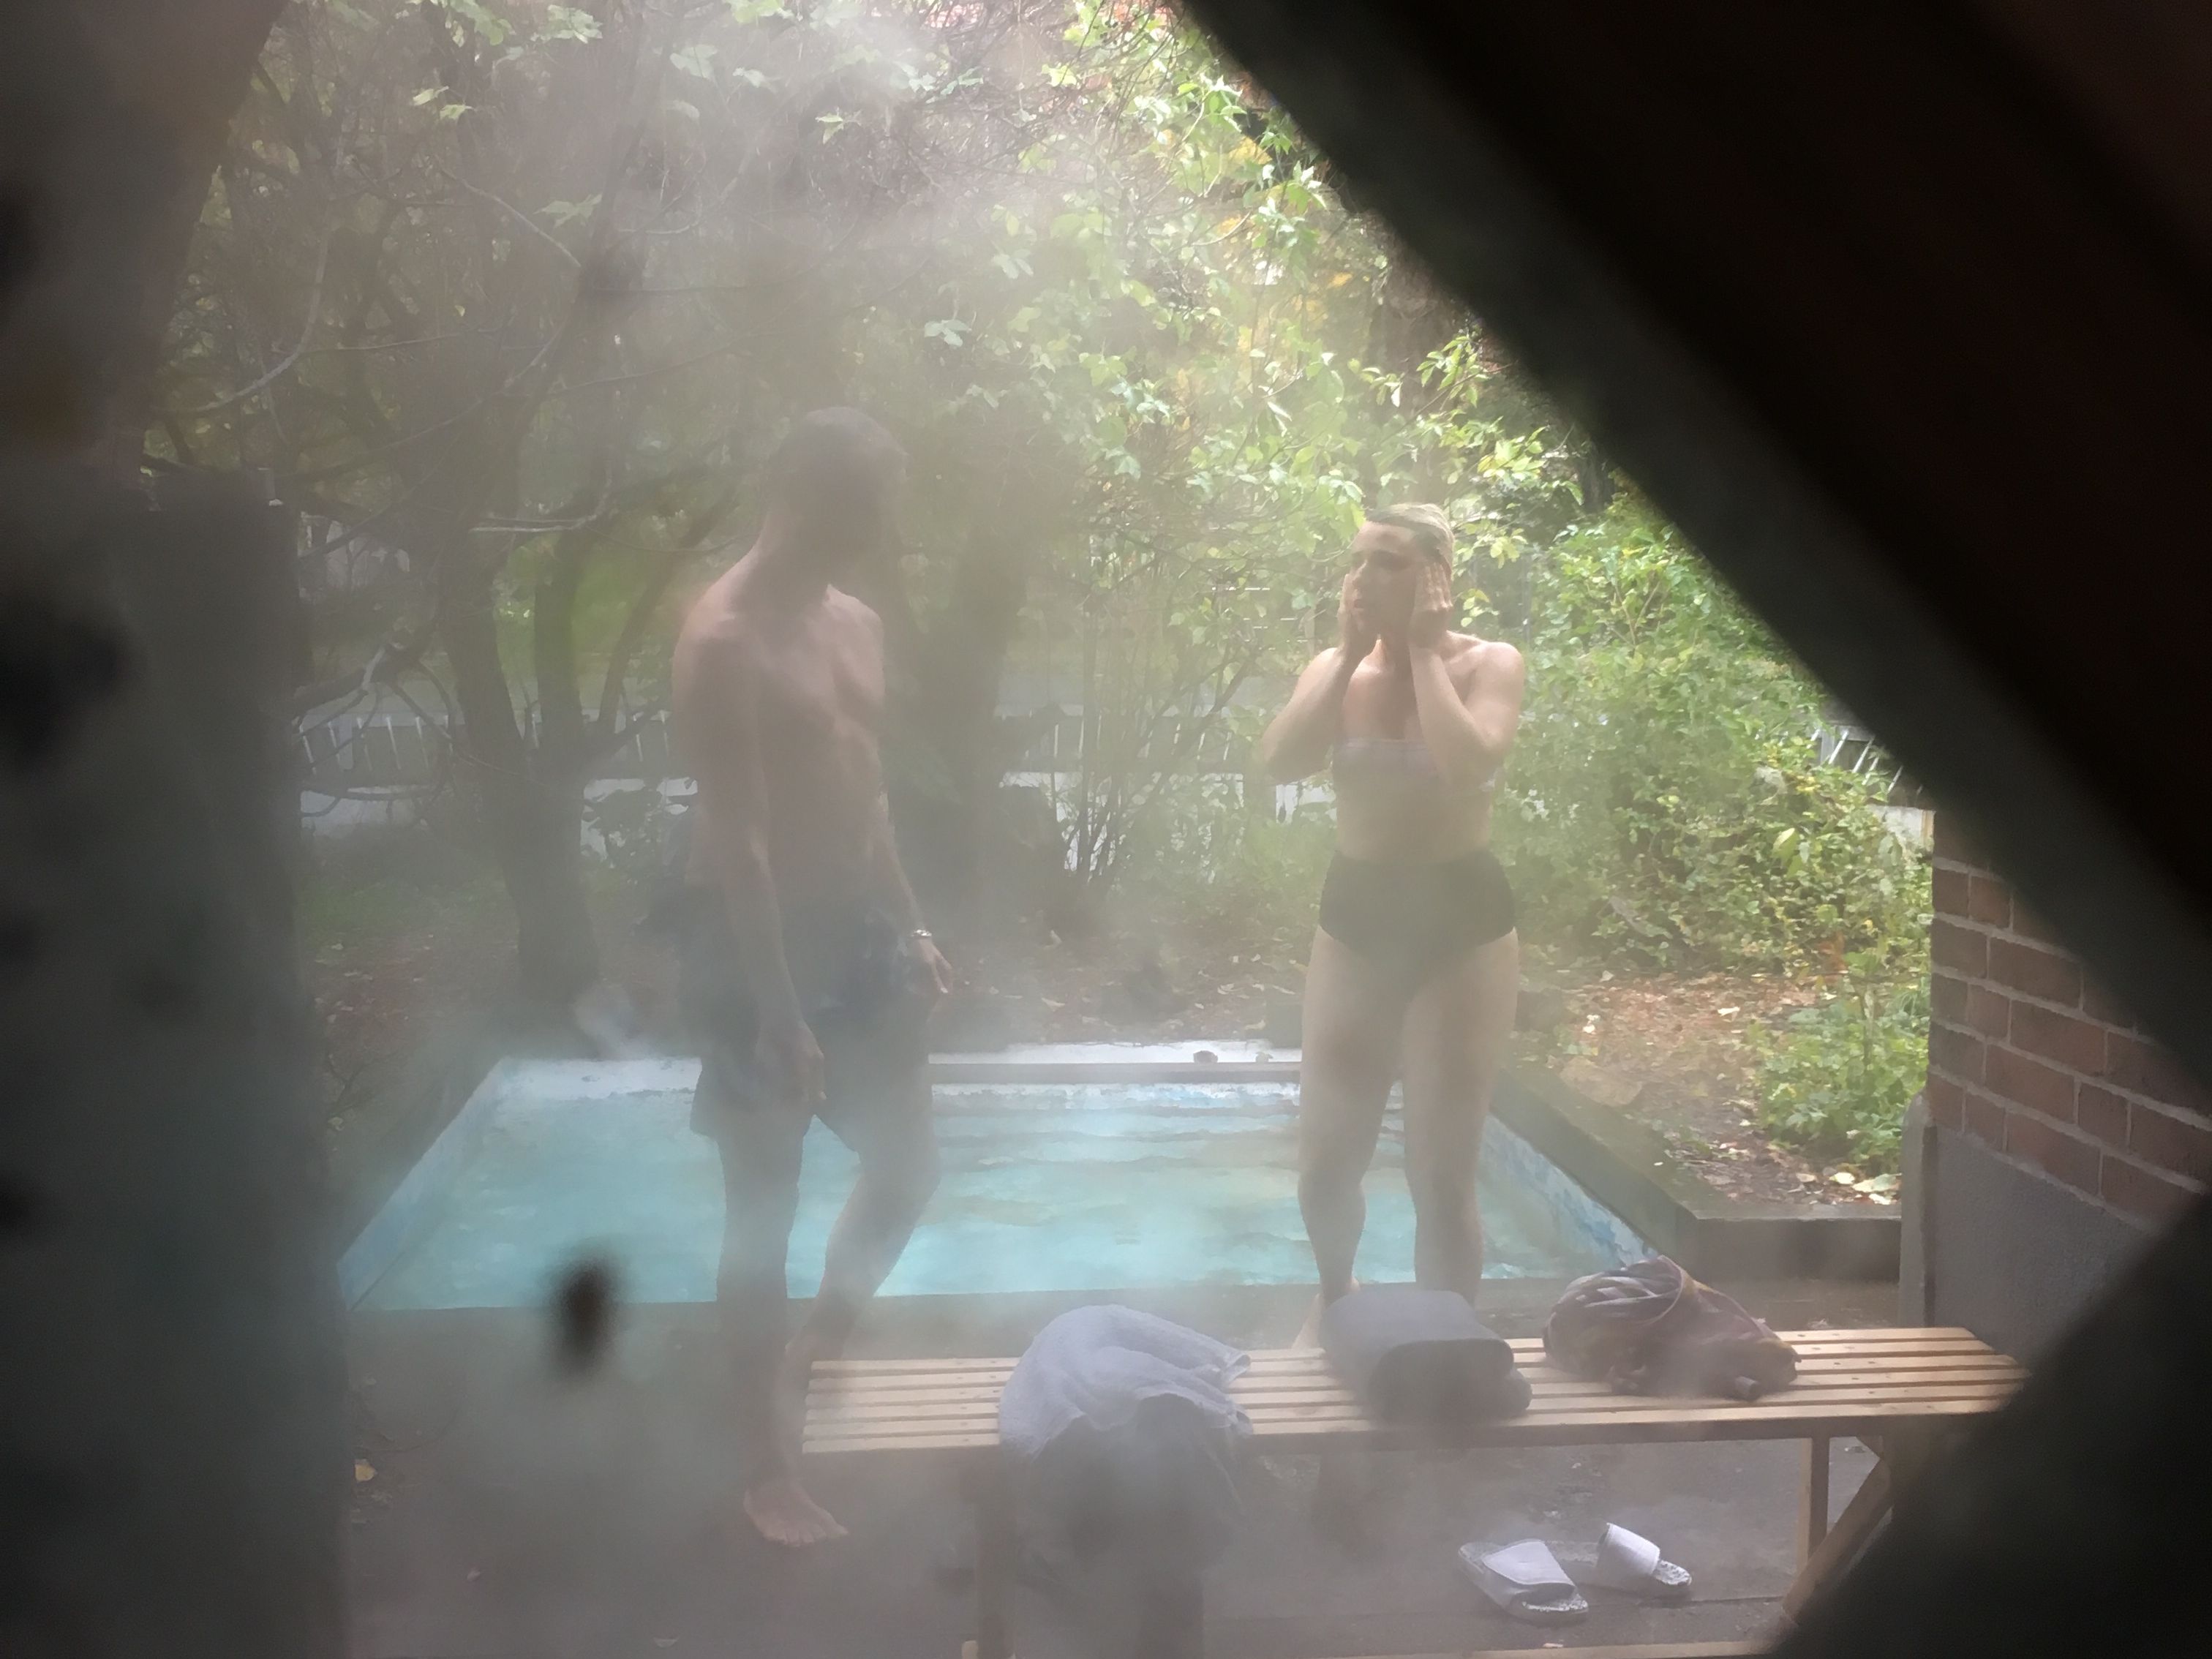 Participants bathing outside in bear pool after sauna in PPKK 03.00 by Sarah Ancelle Schoenfeld and Louis-Philippe Scoufaras at Baerenzwinger Berlin